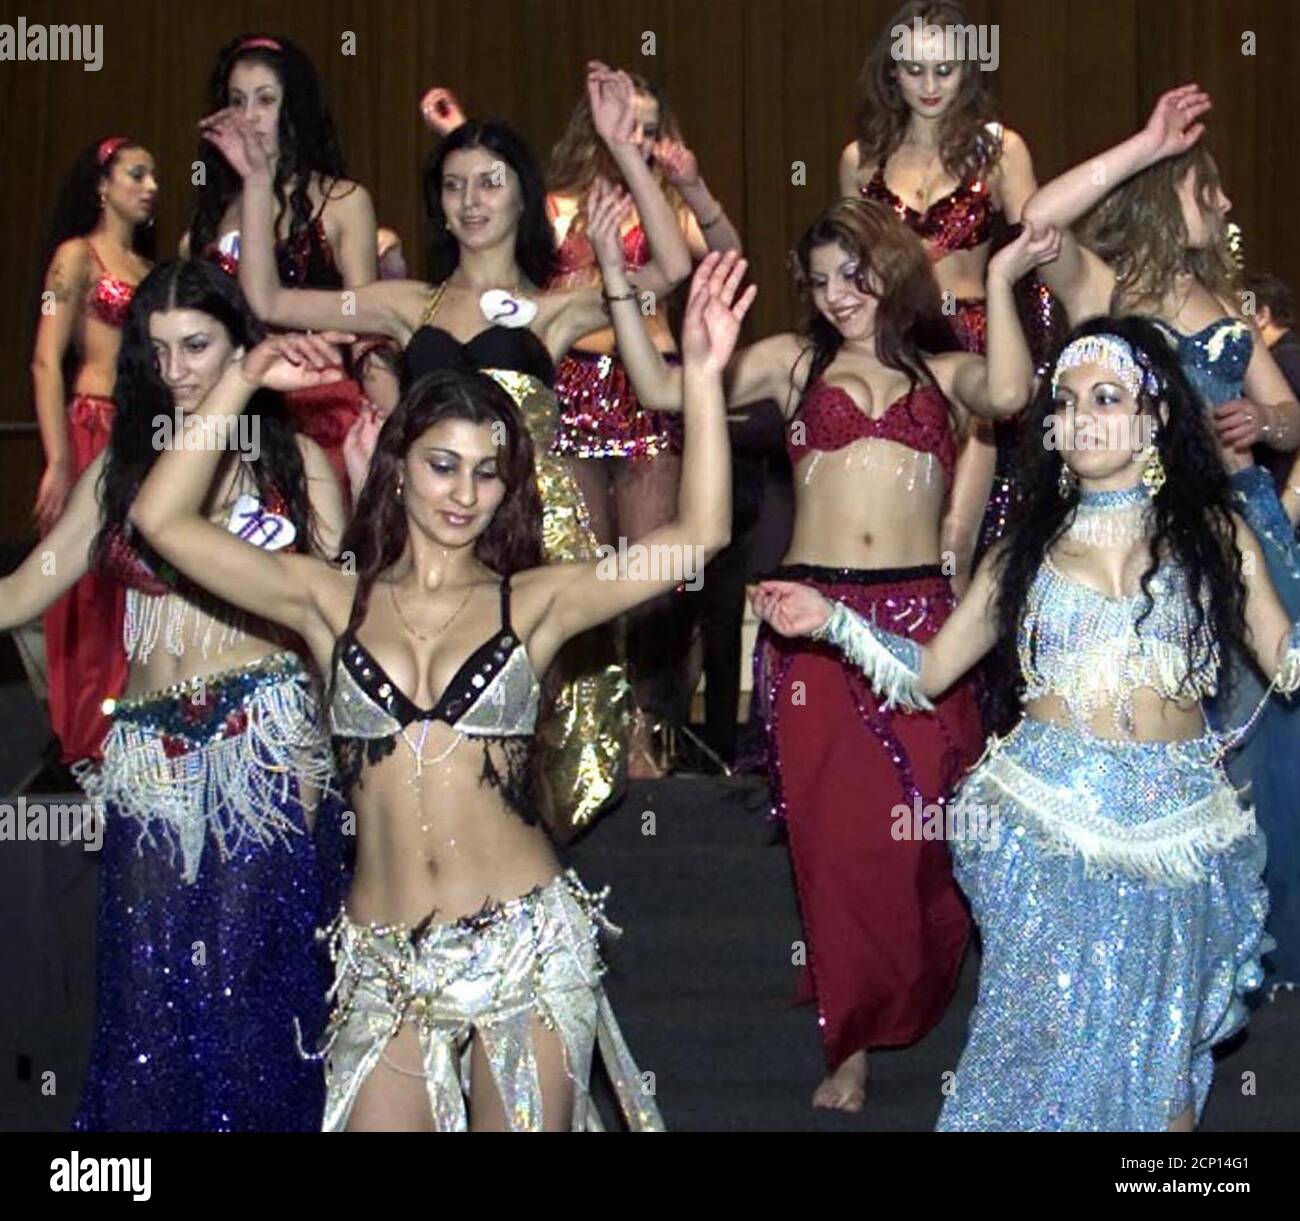 Romanian gypsy girls perform a belly dance on the stage January 20, 2002  during the Miss Gipsy contest in Bucharest. The gipsies are electing their  Miss not only by their beauty but